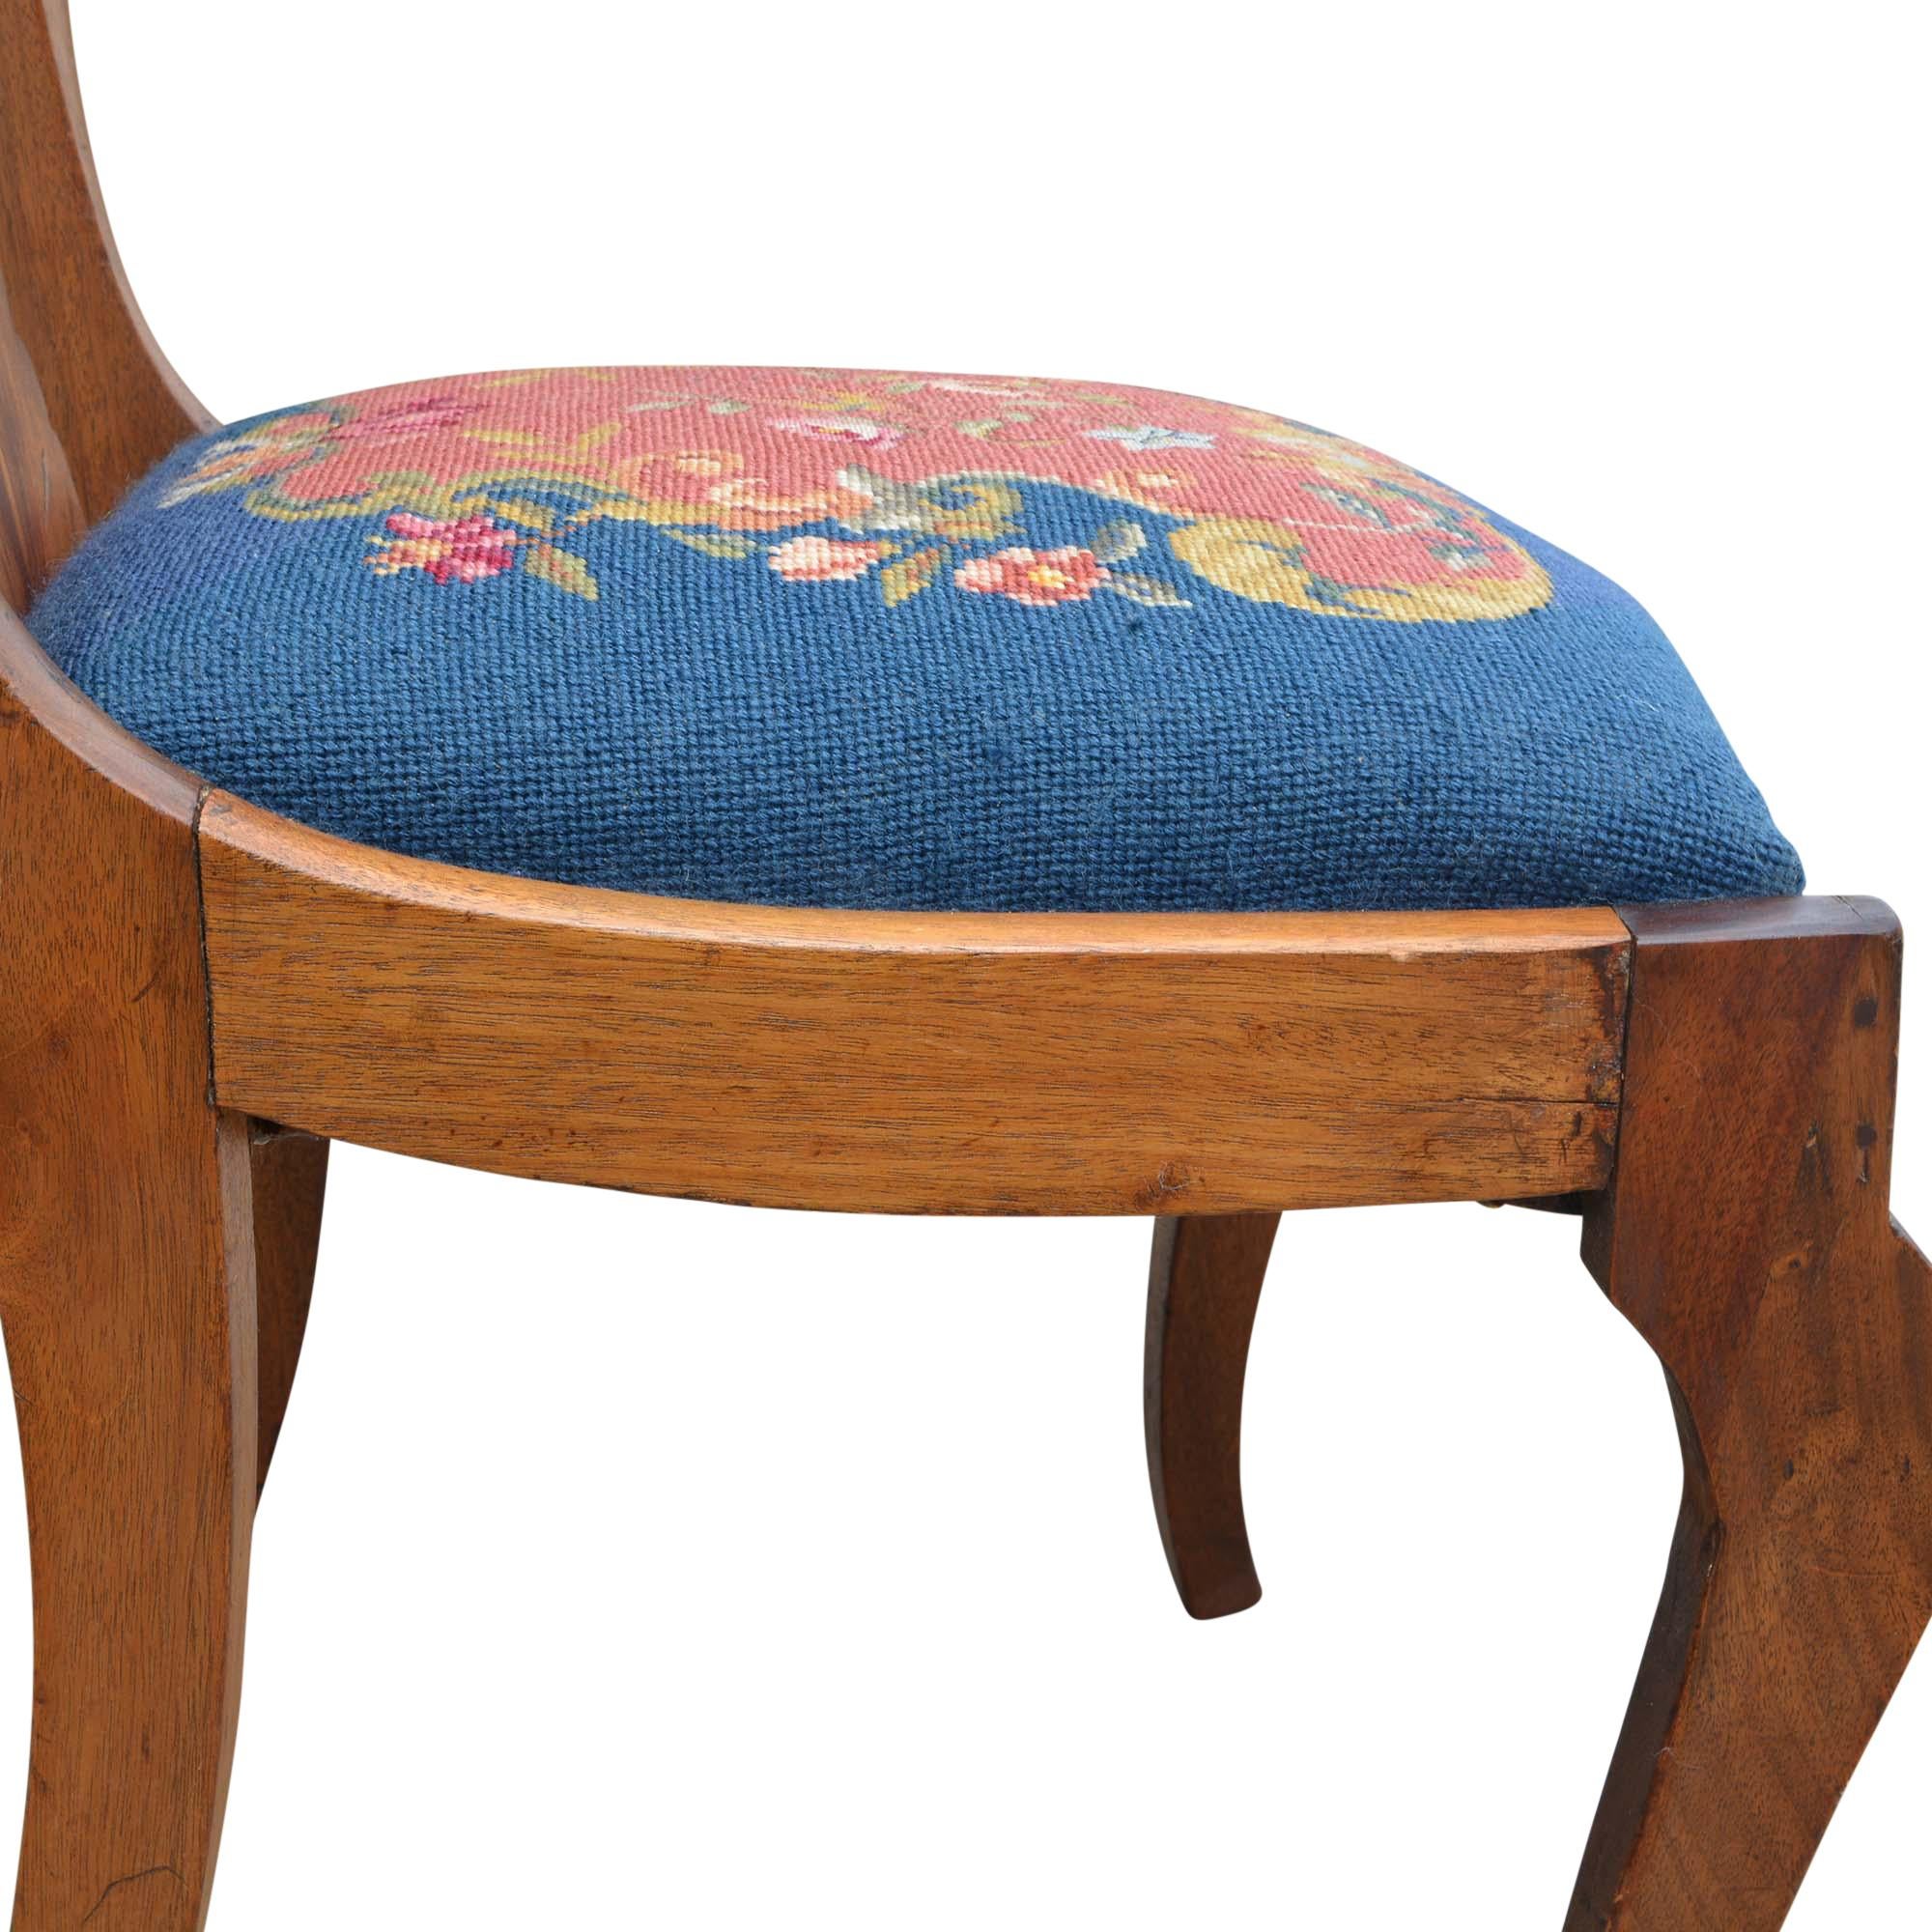 20th Century Victorian Parlor Chair with Needlepoint Seat